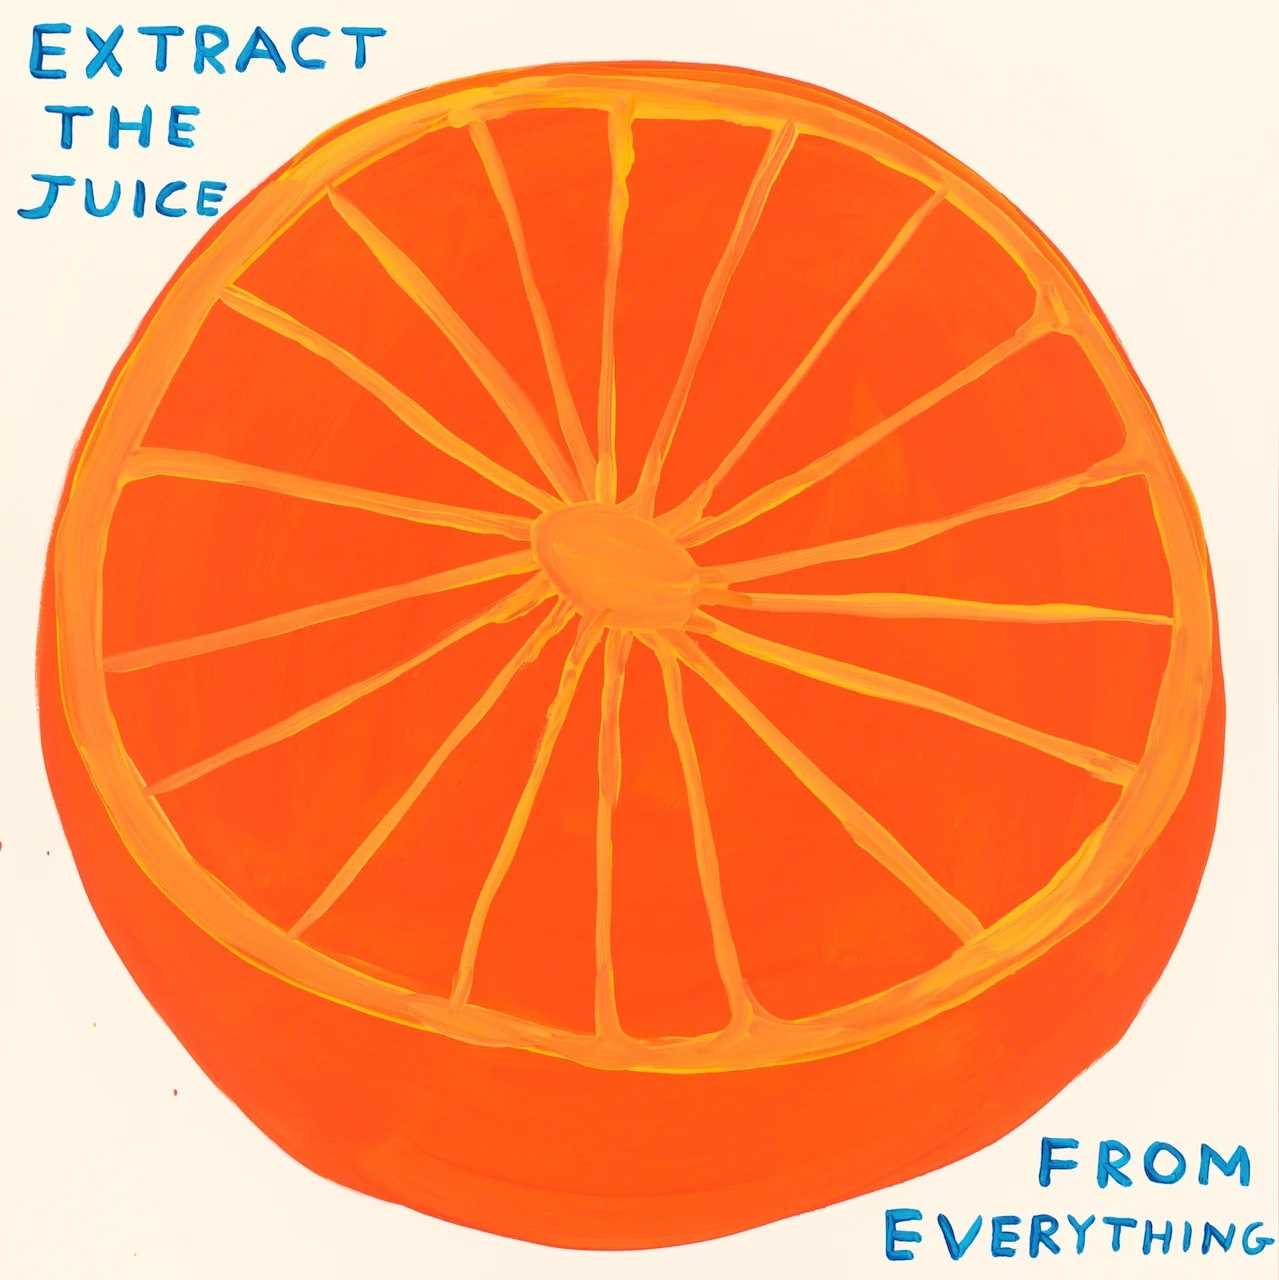 Lot 62 - David Shrigley (British 1968-), 'Extract The Juice From Everything', 2023